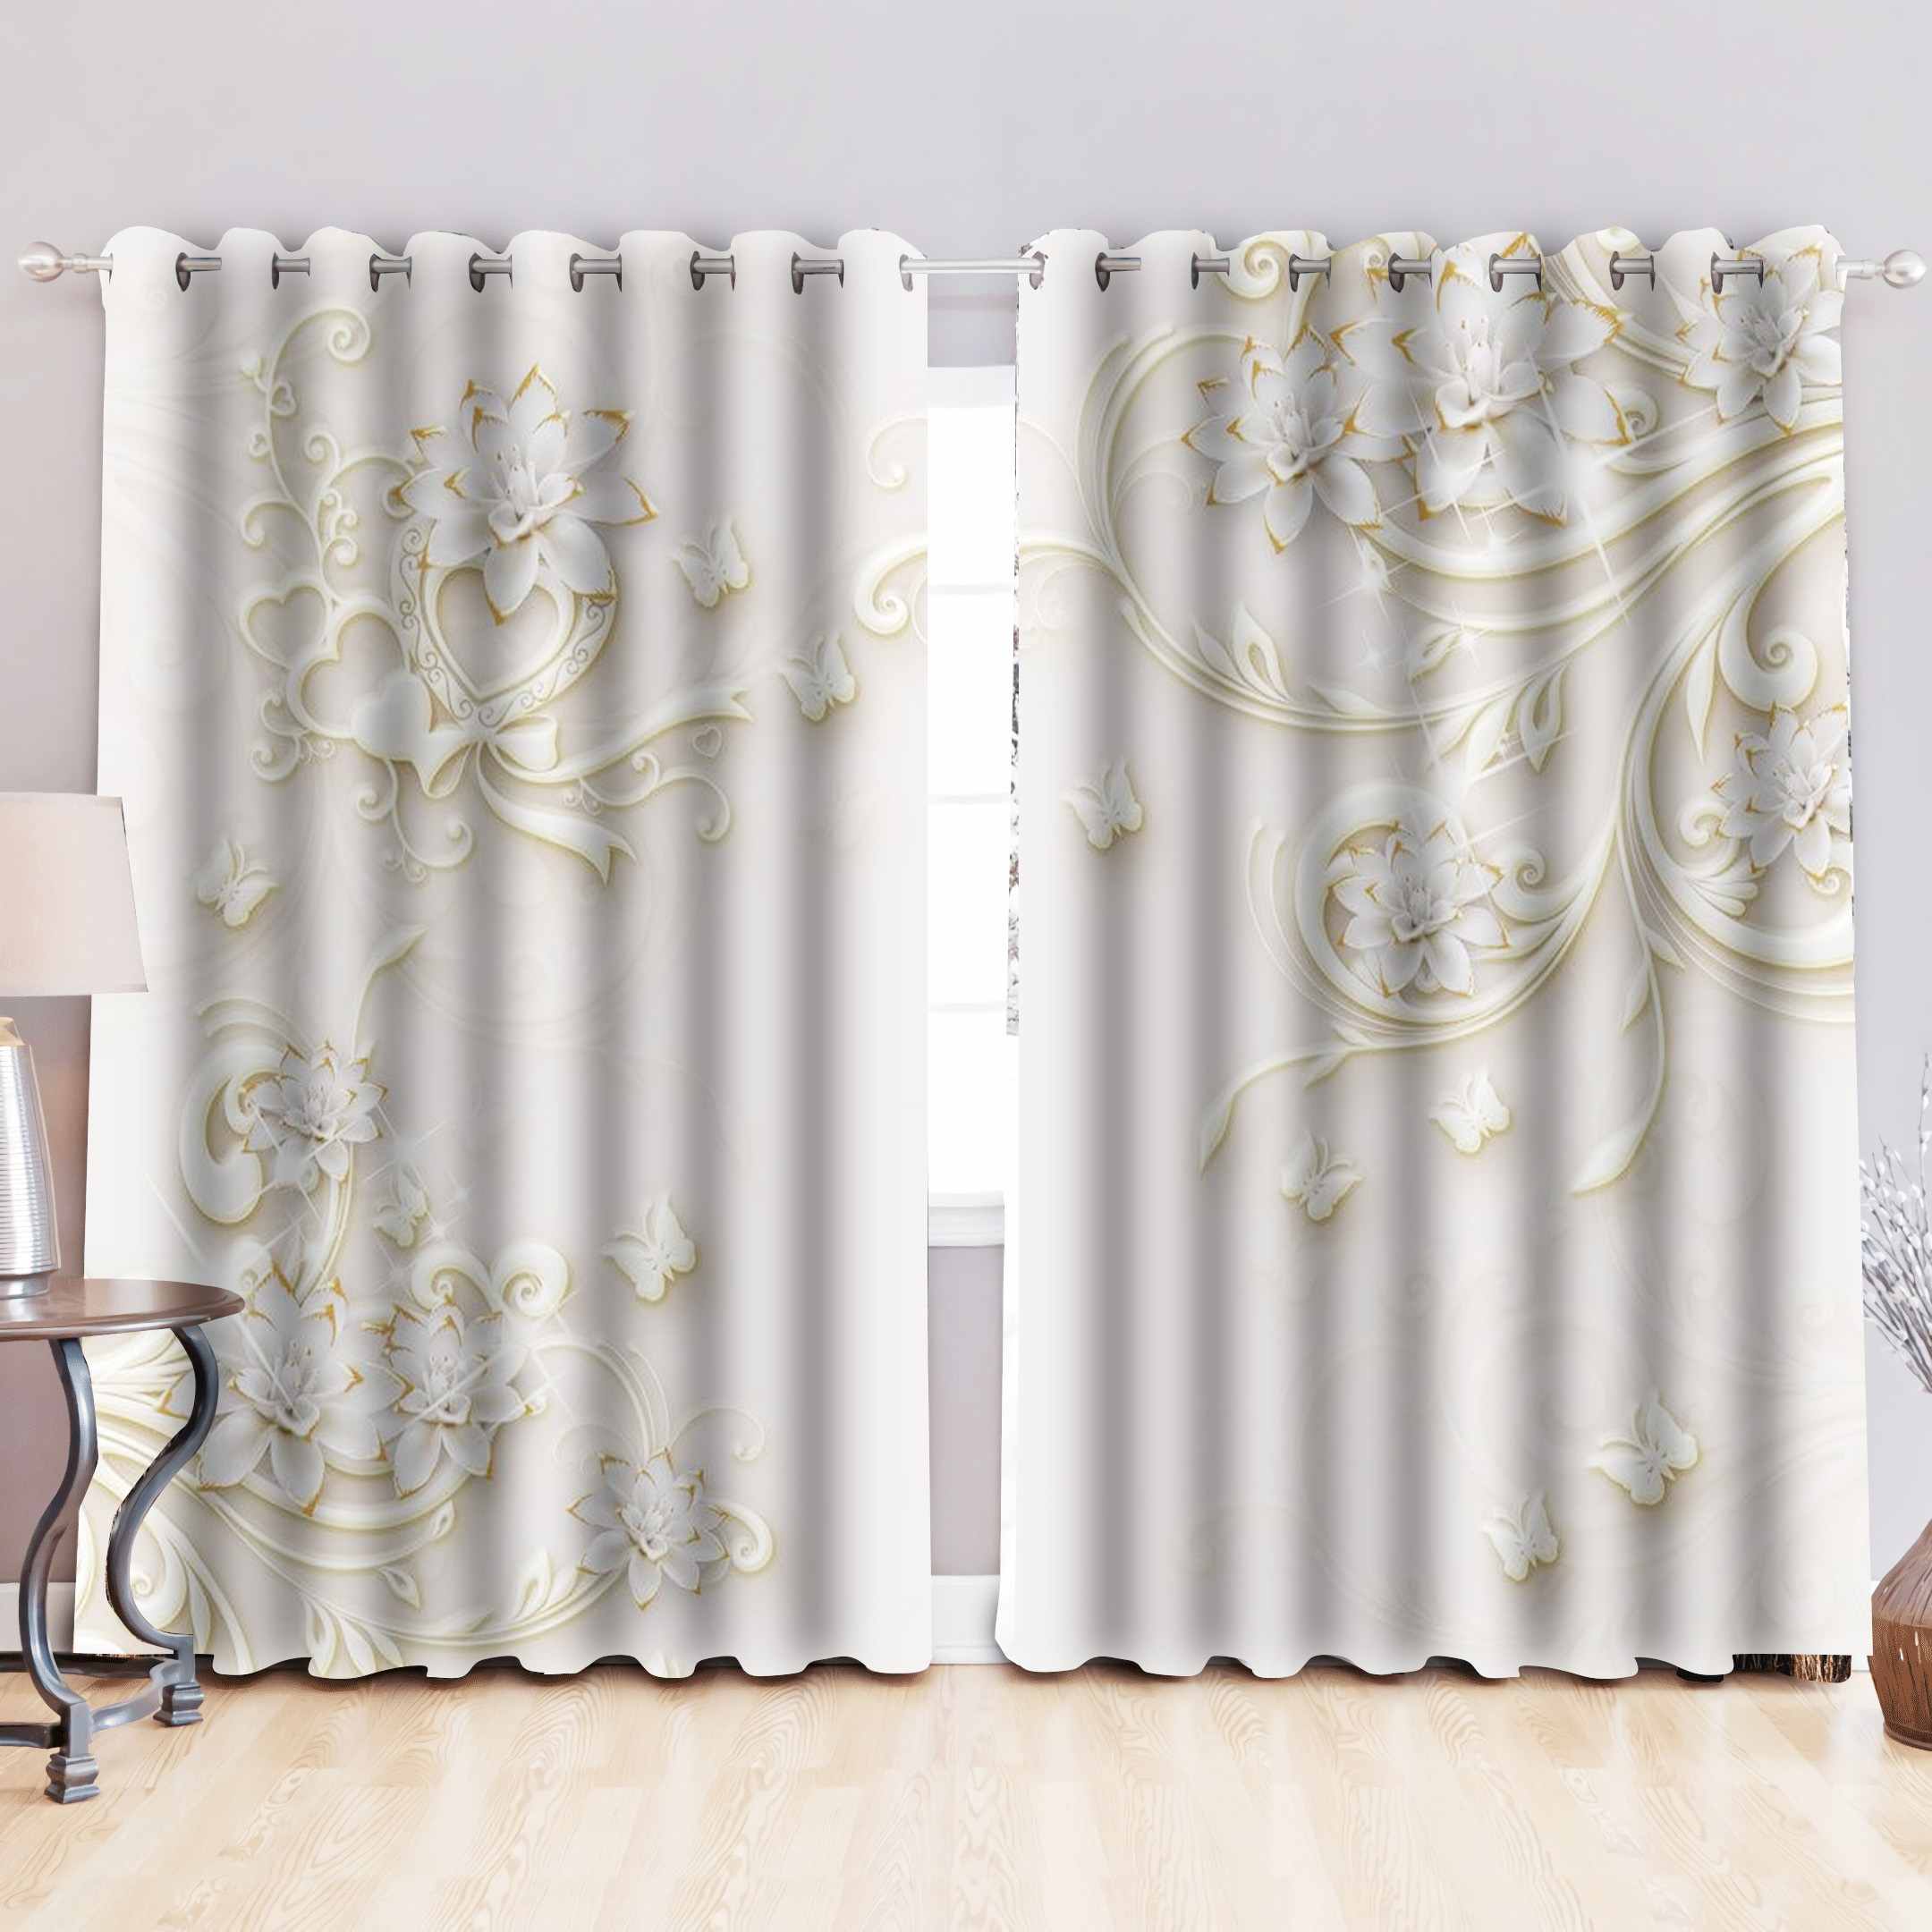 White Blooms Printed Window Curtain Home Decor